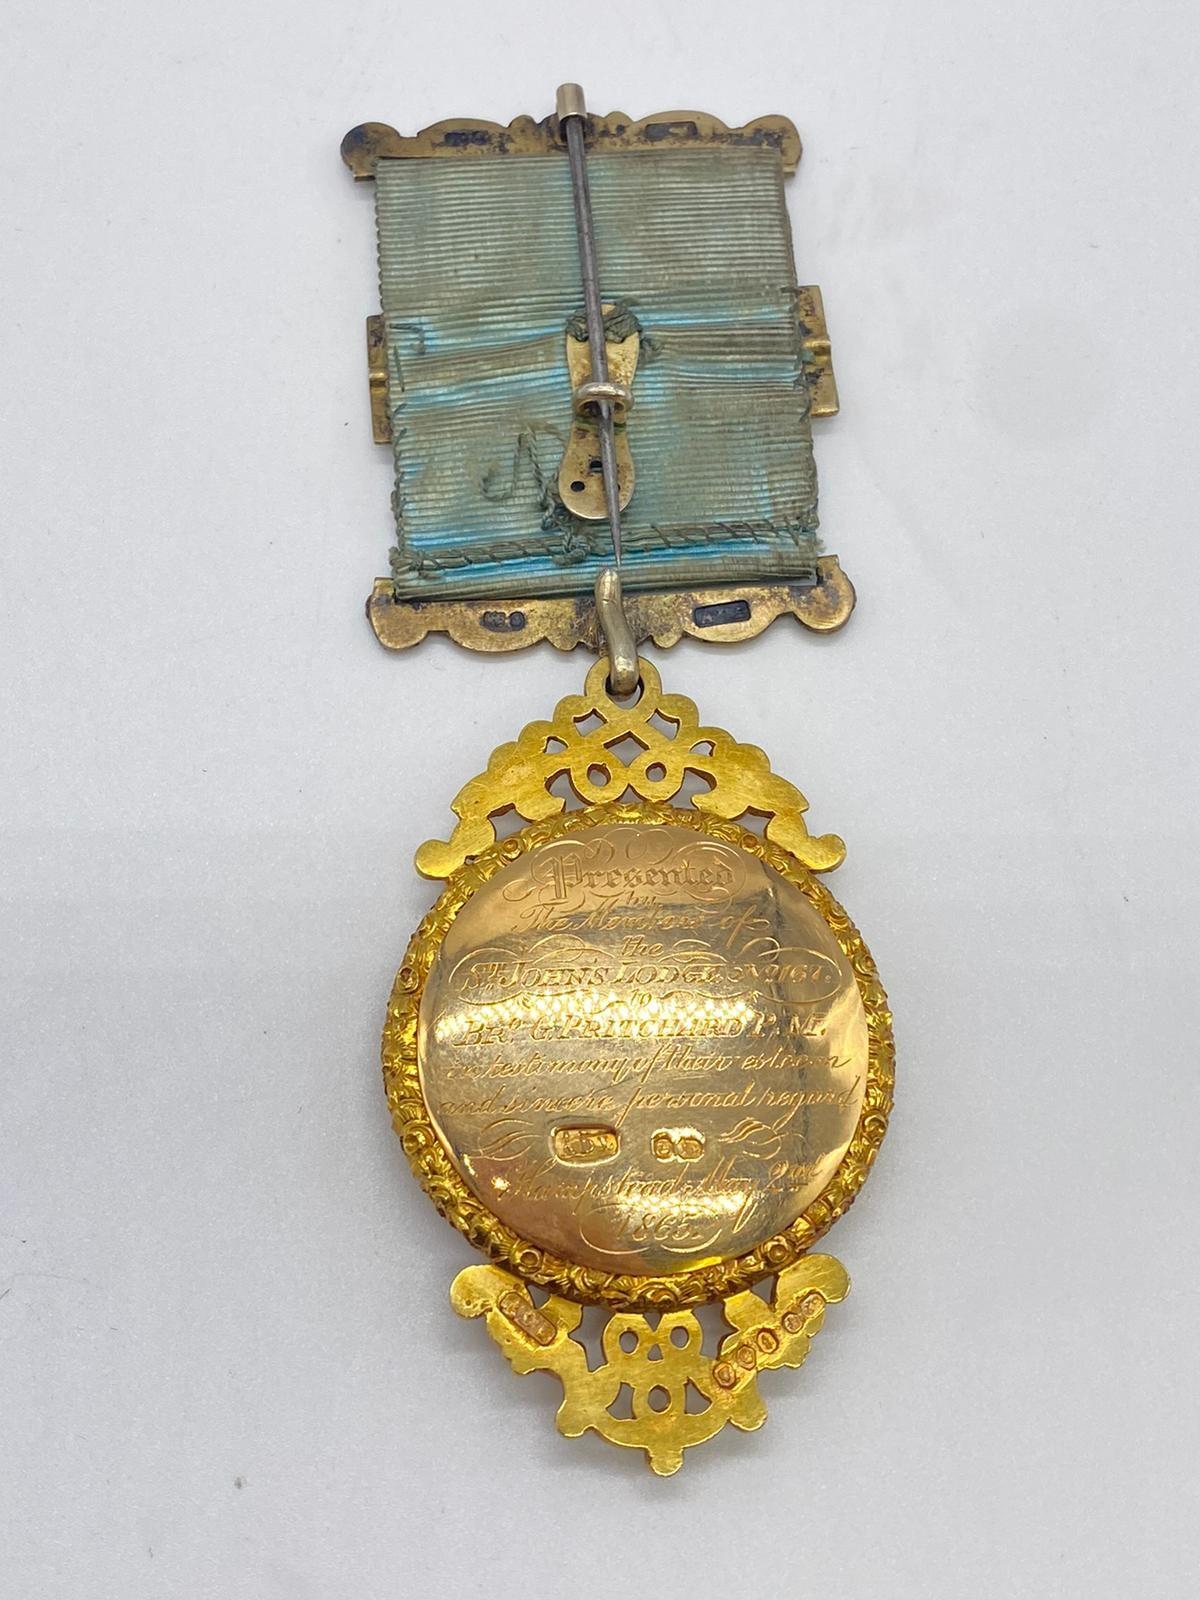 18ct gold Masonic jewel dated 1865 from the St's John lodge Hampstead number 167, weight 62.3g total - Image 8 of 8